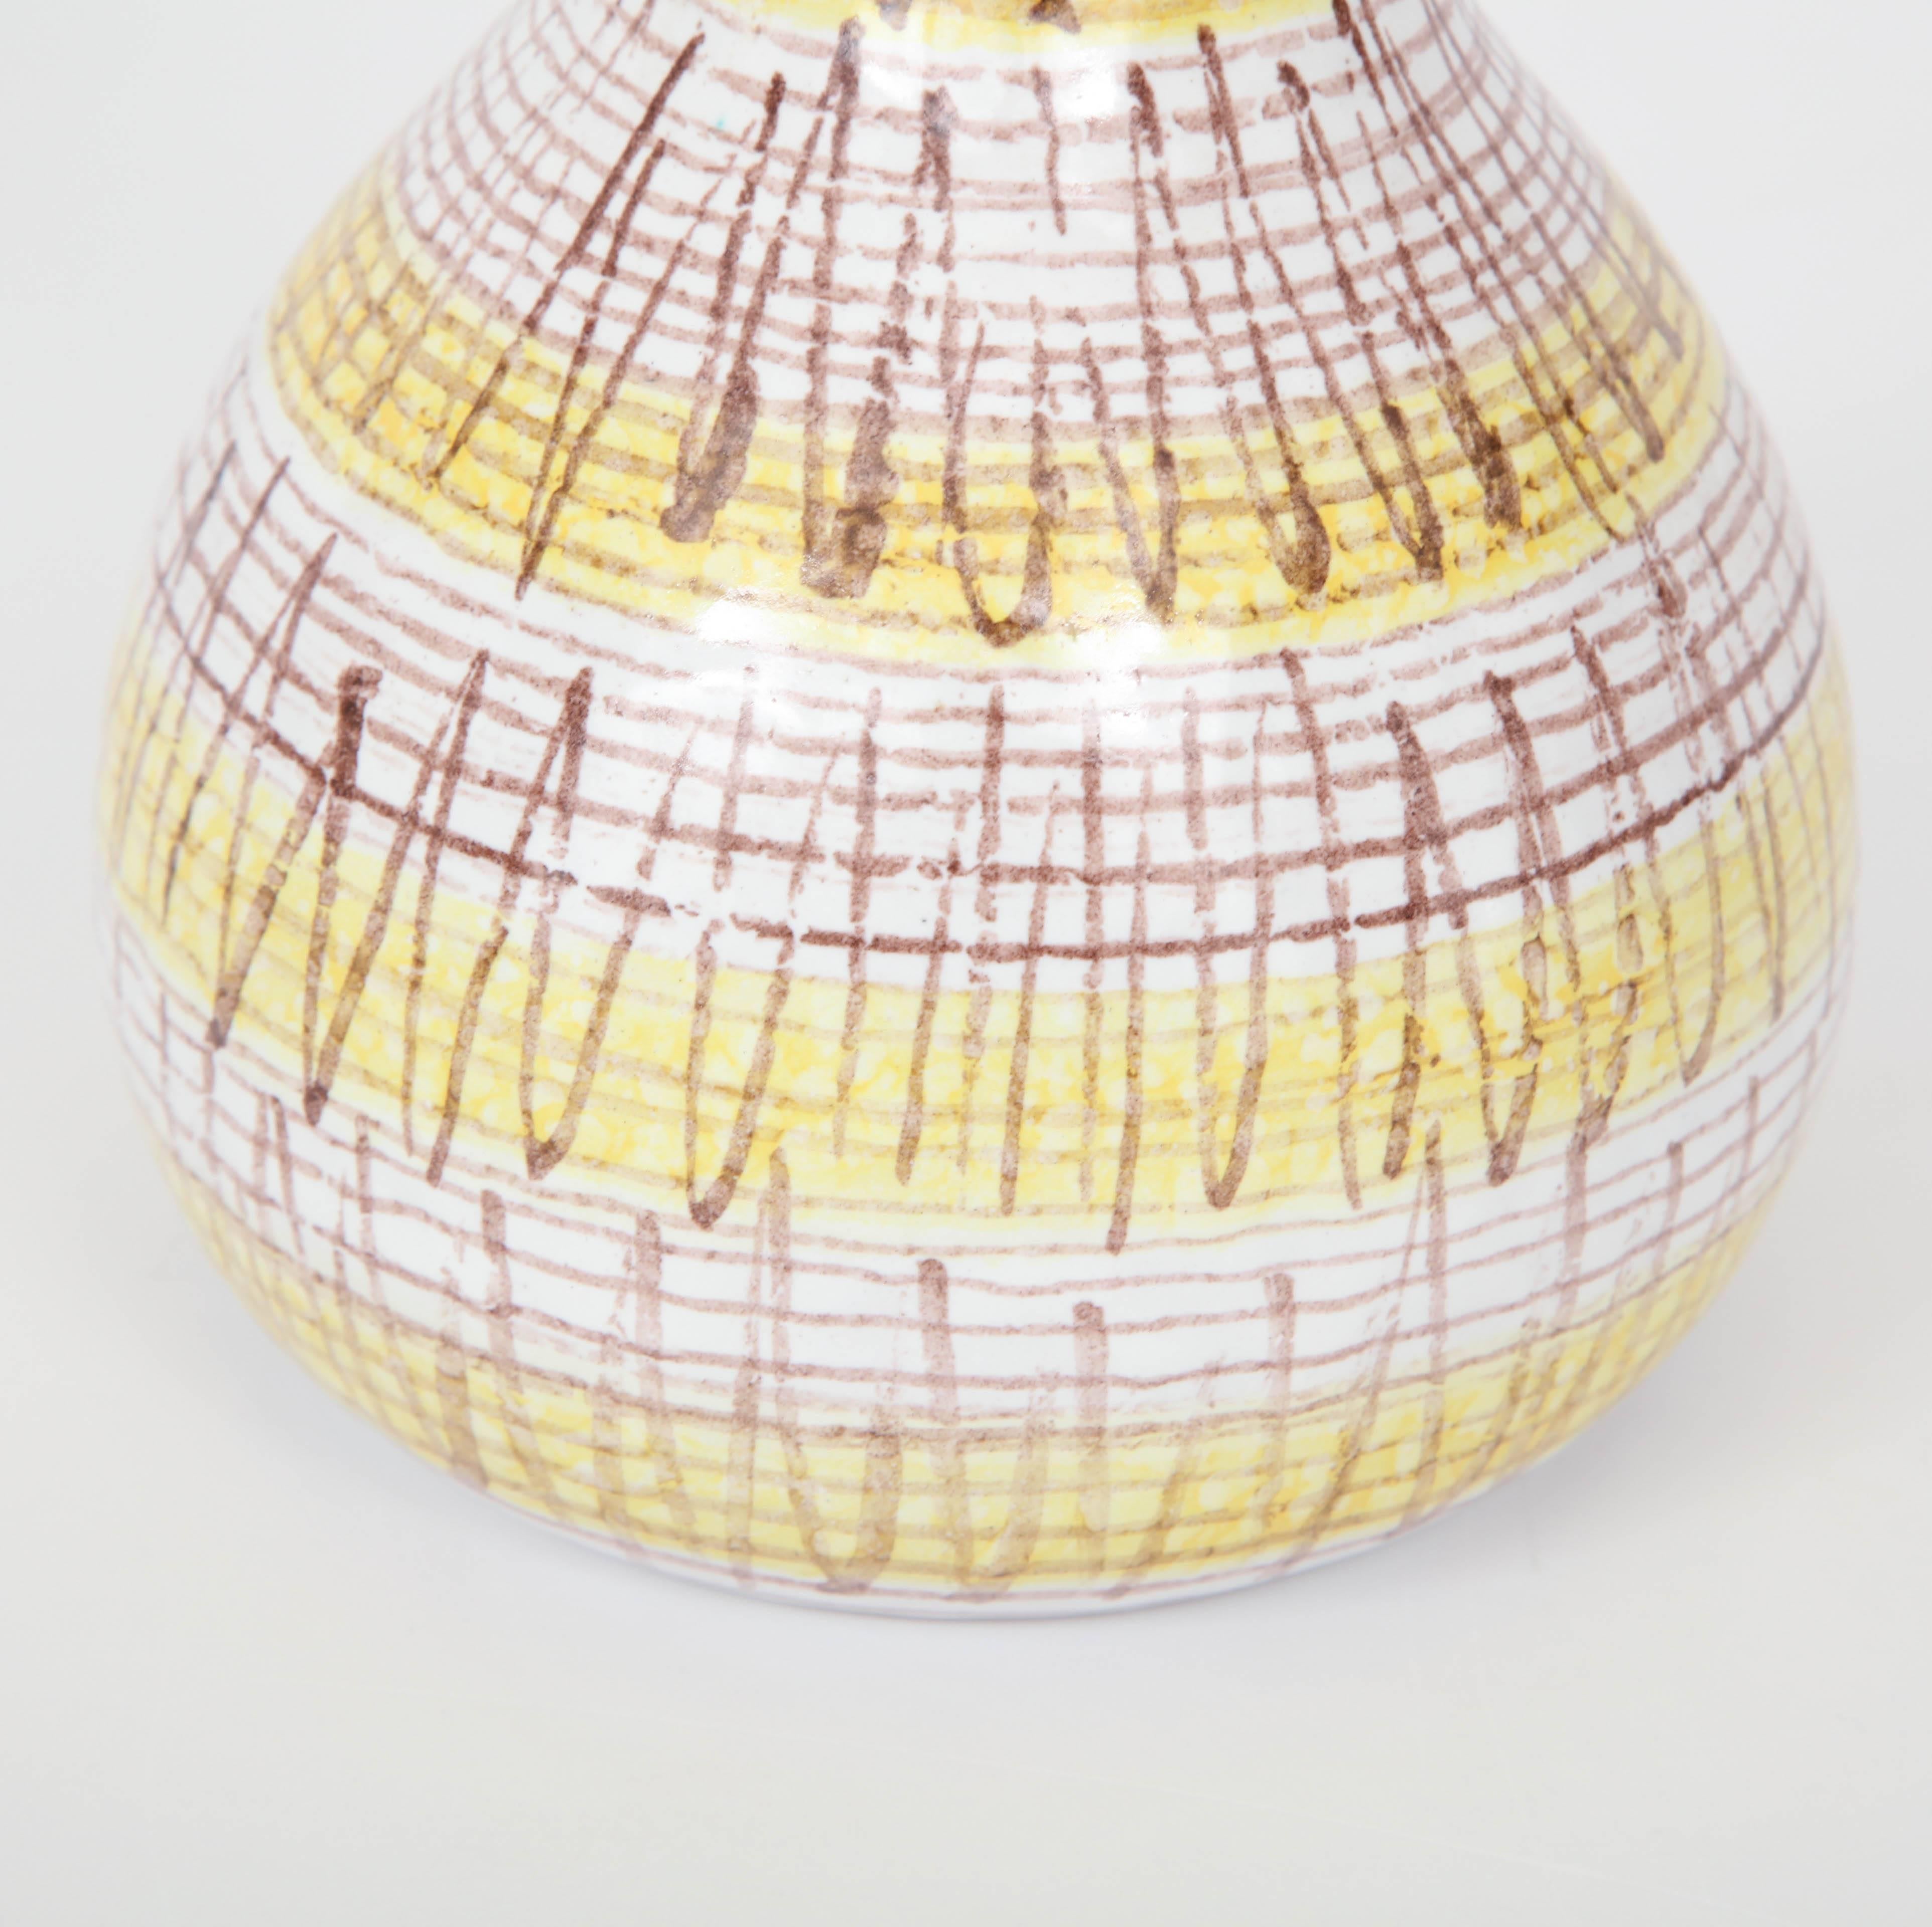 Hand-Crafted Ceramic Vase, Mid-Century Italian, Yellow, Brown and White, circa 1950, Vessel